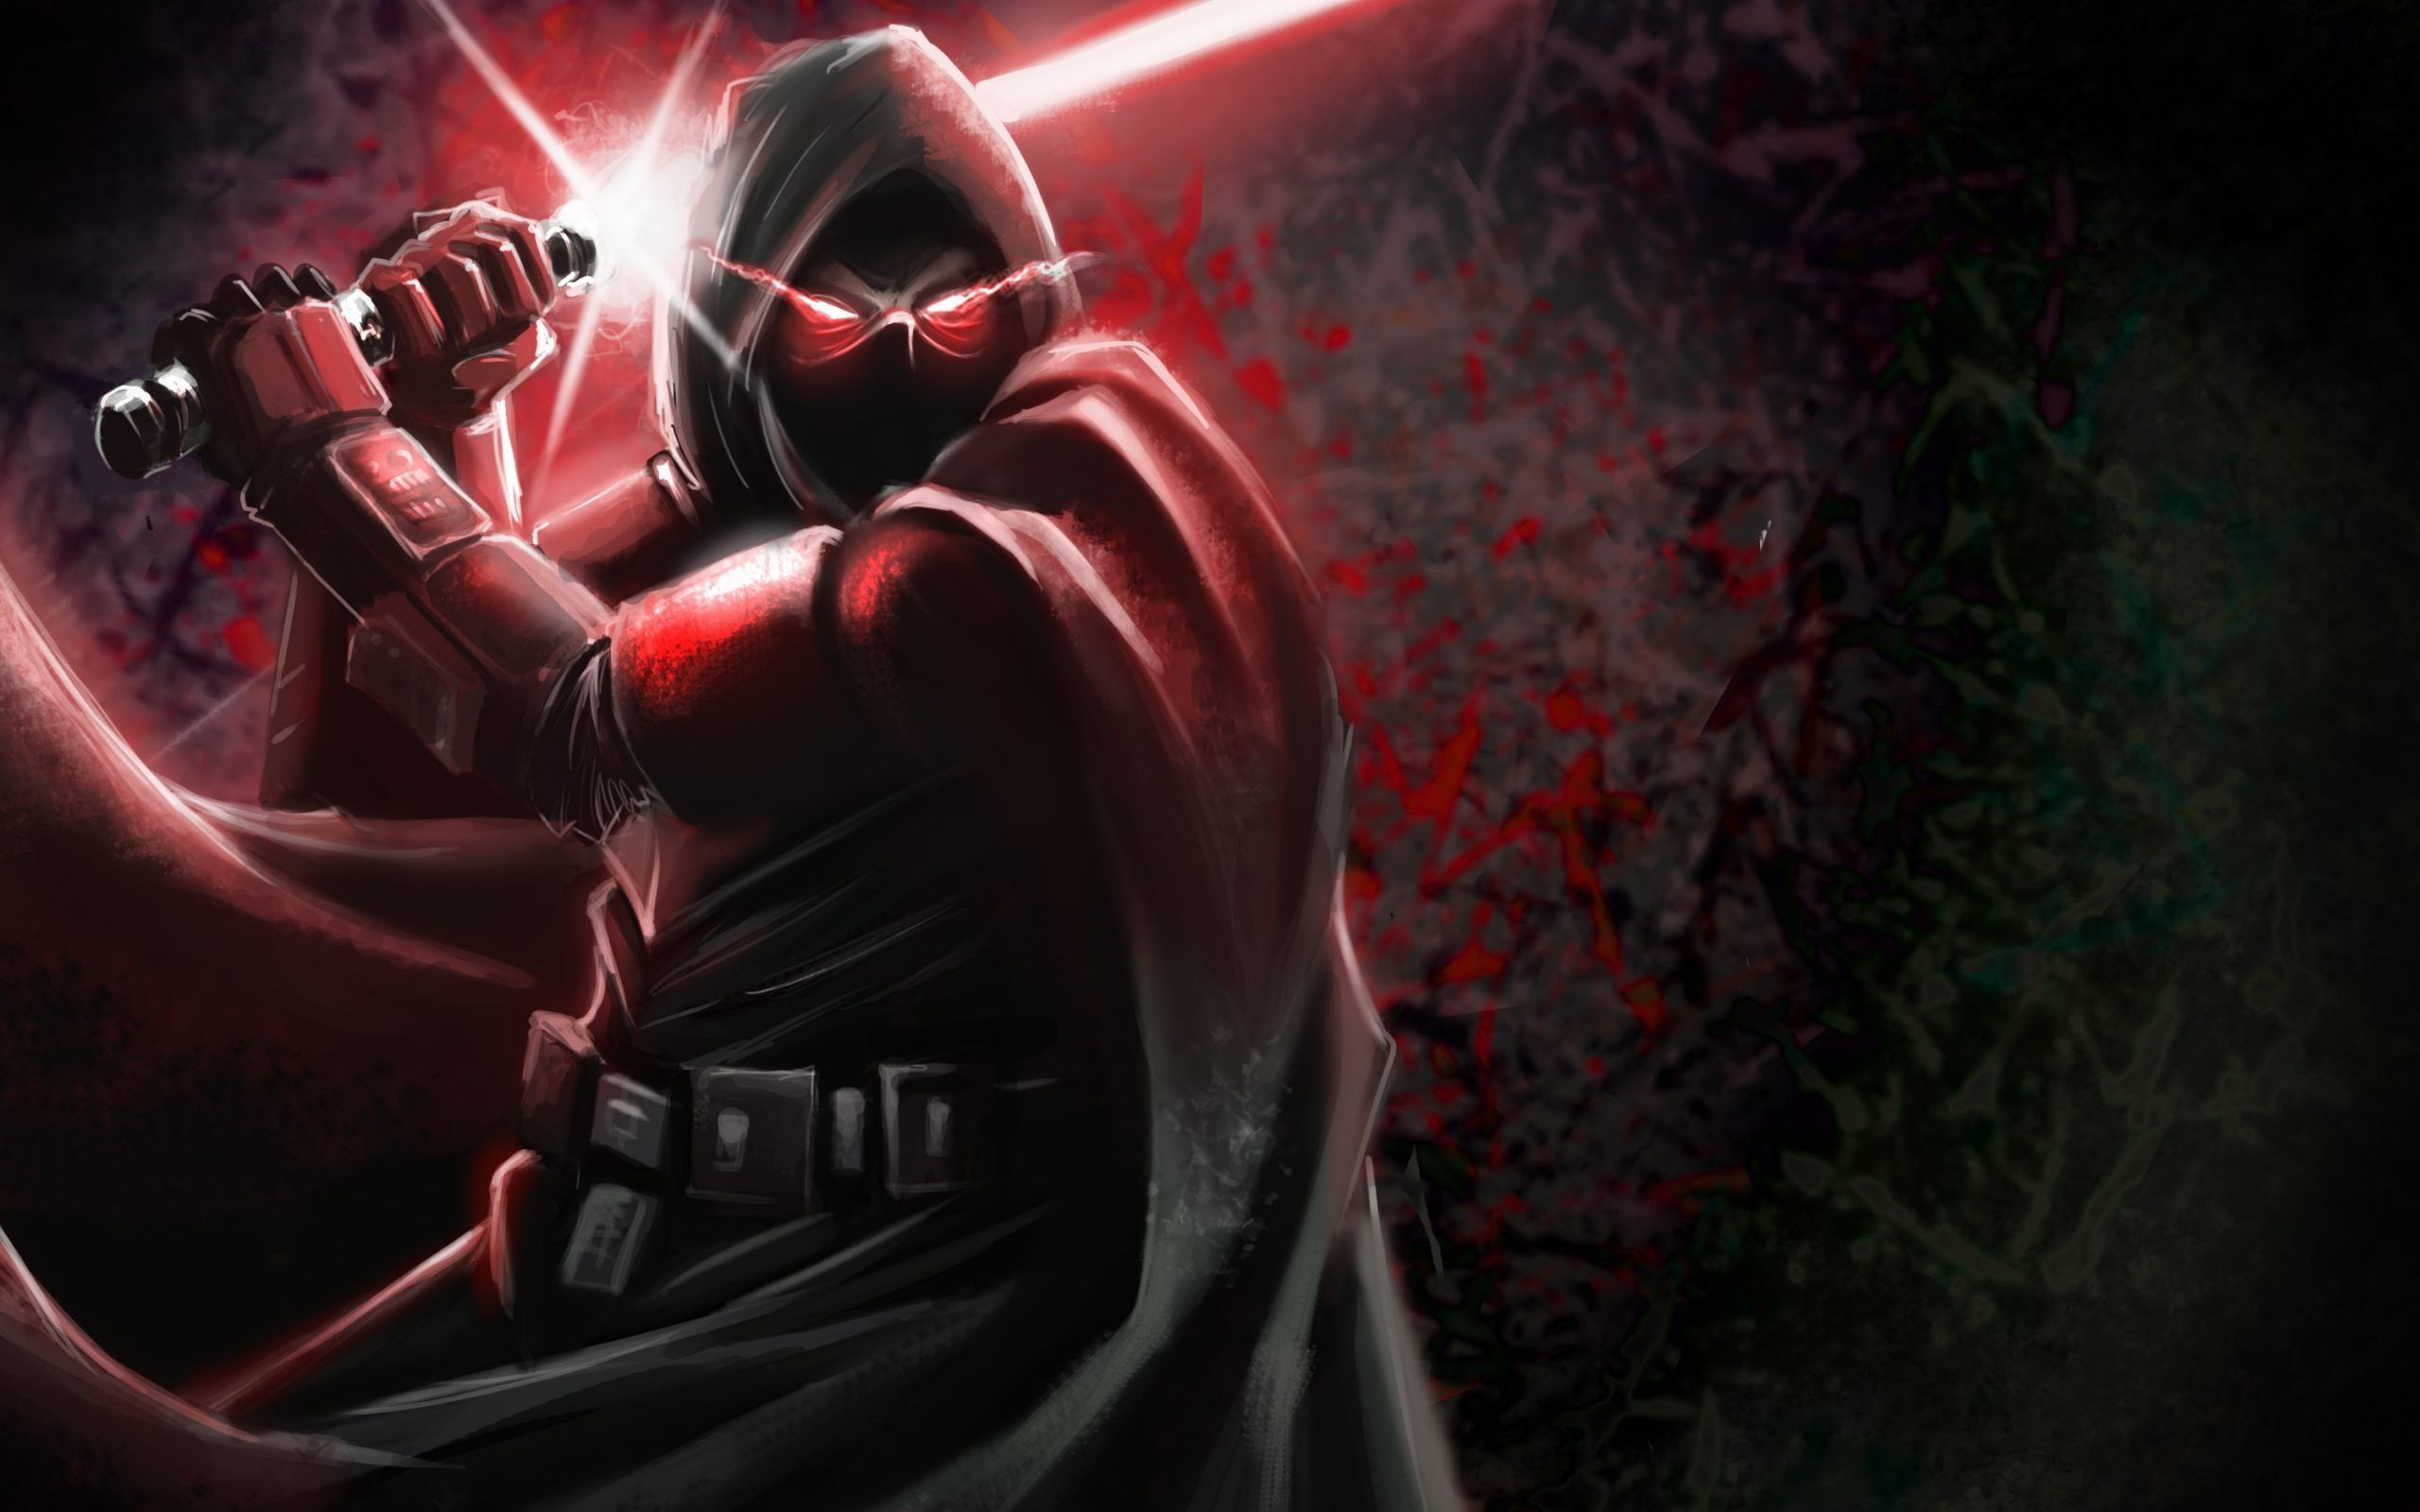 Star Wars Sith Wallpapers.